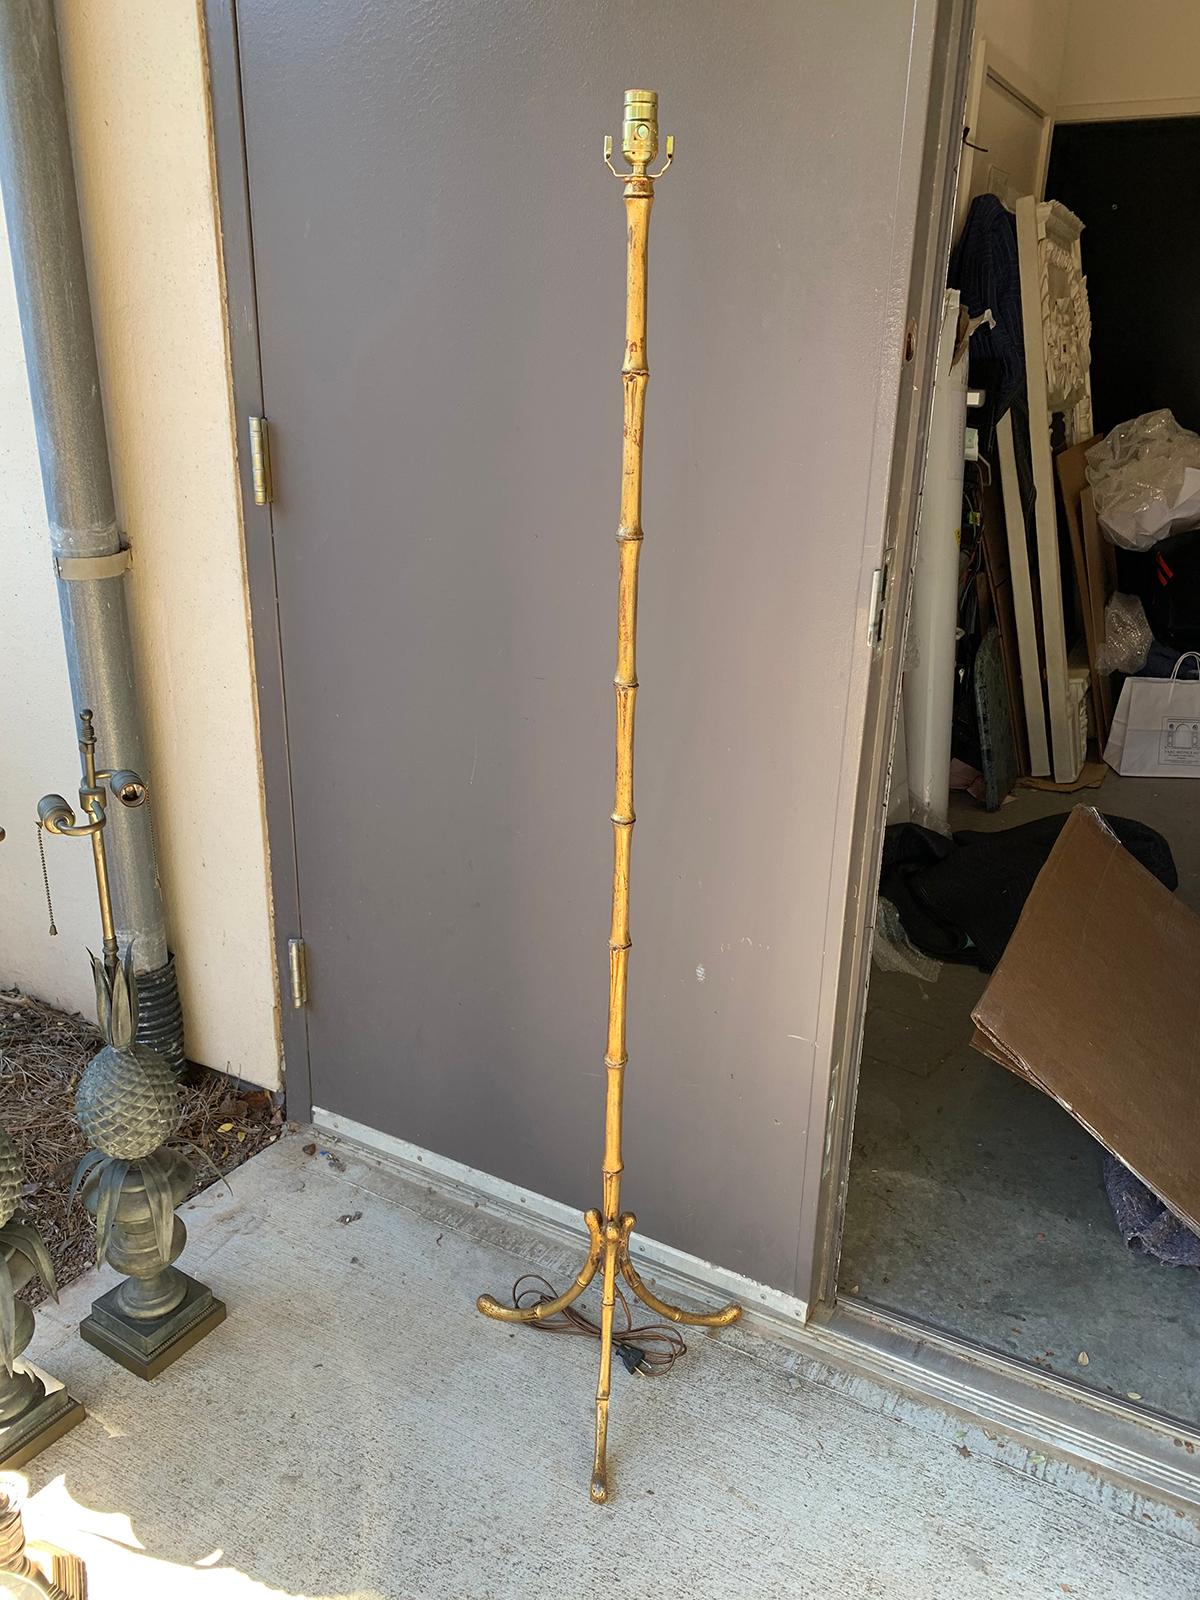 20th century gilt metal faux bamboo floor lamp
New wiring.